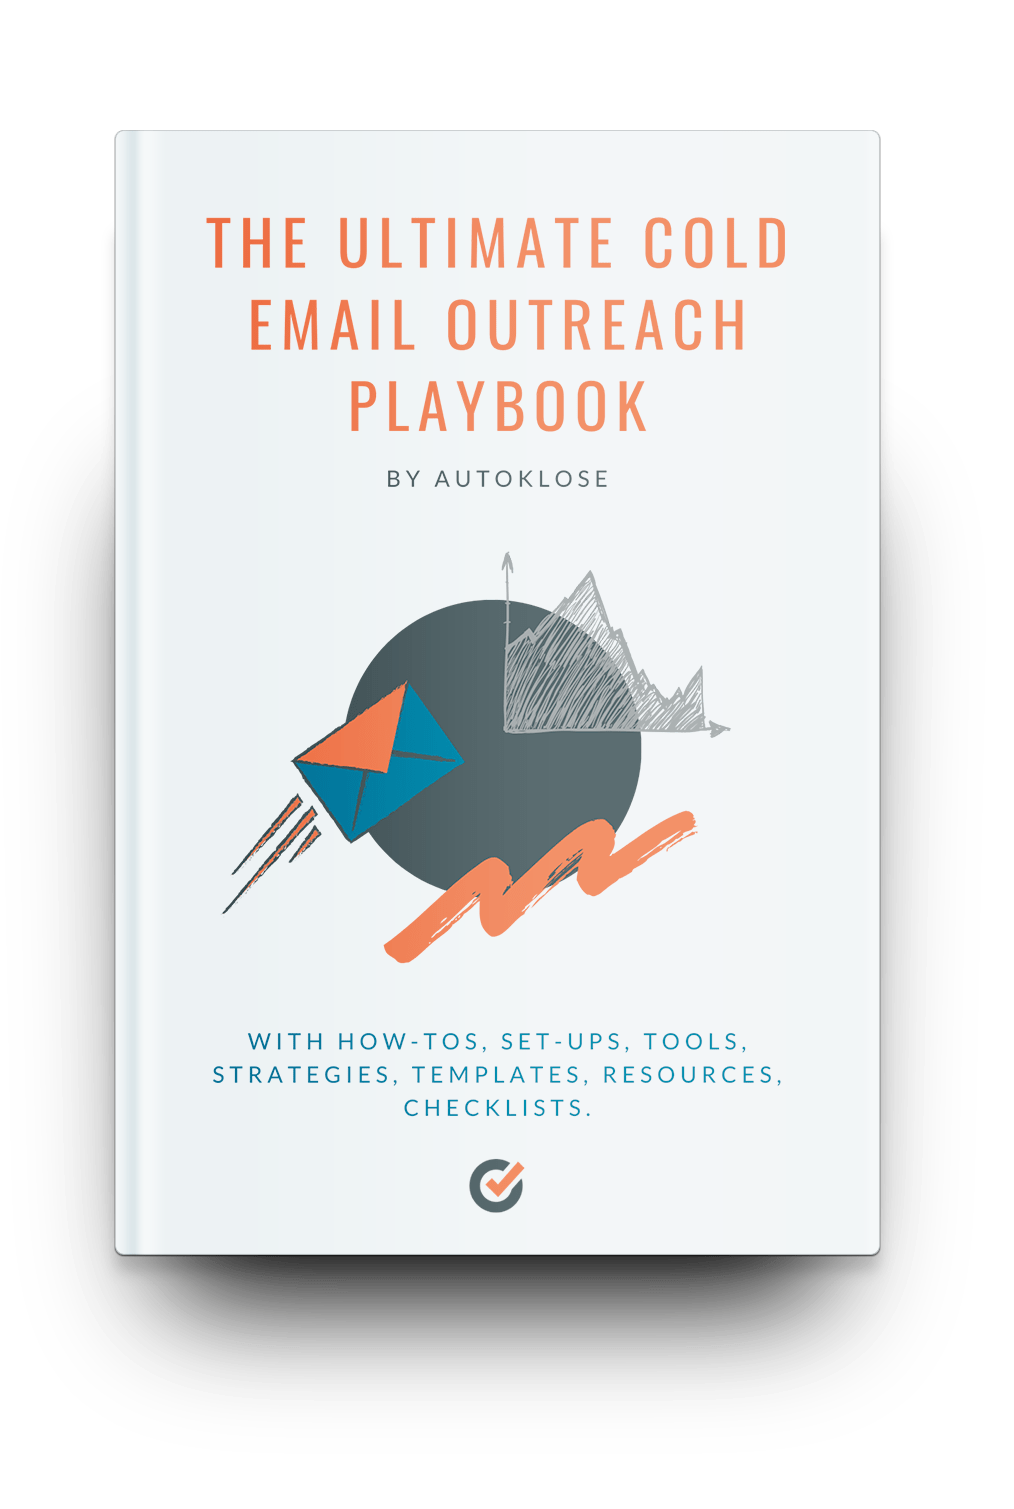 [GET] The Ultimate Cold Email Outreach Playbook Download